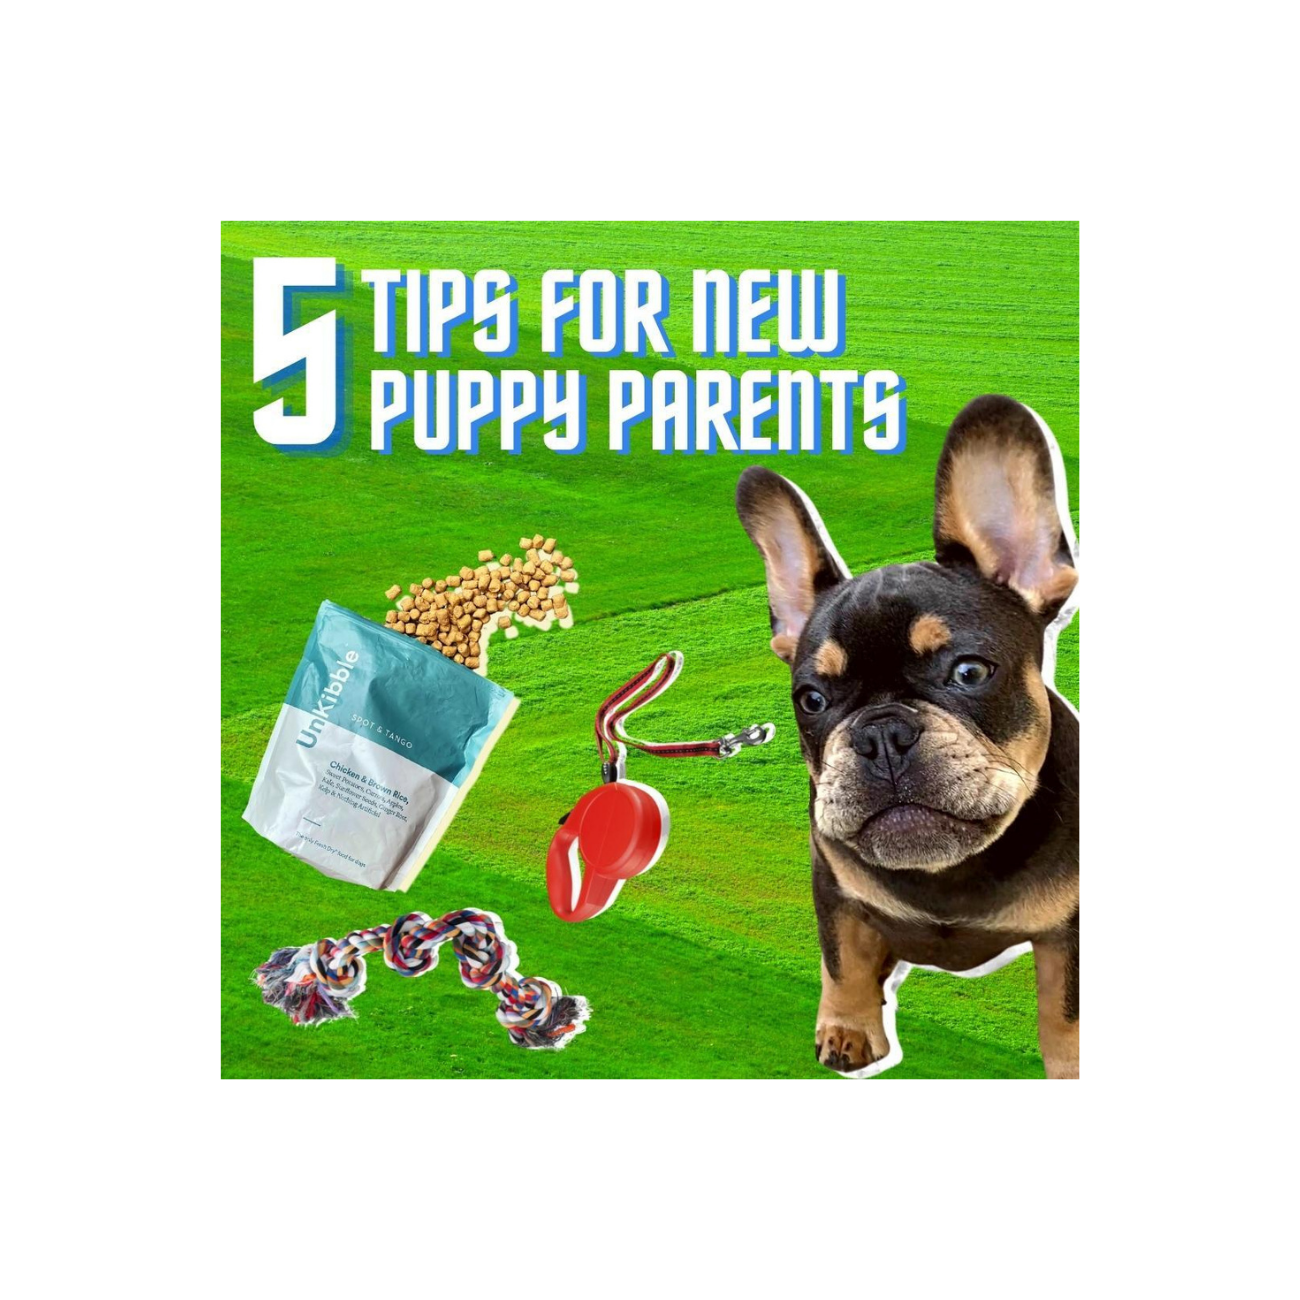 5 Tips For New Puppy Parents